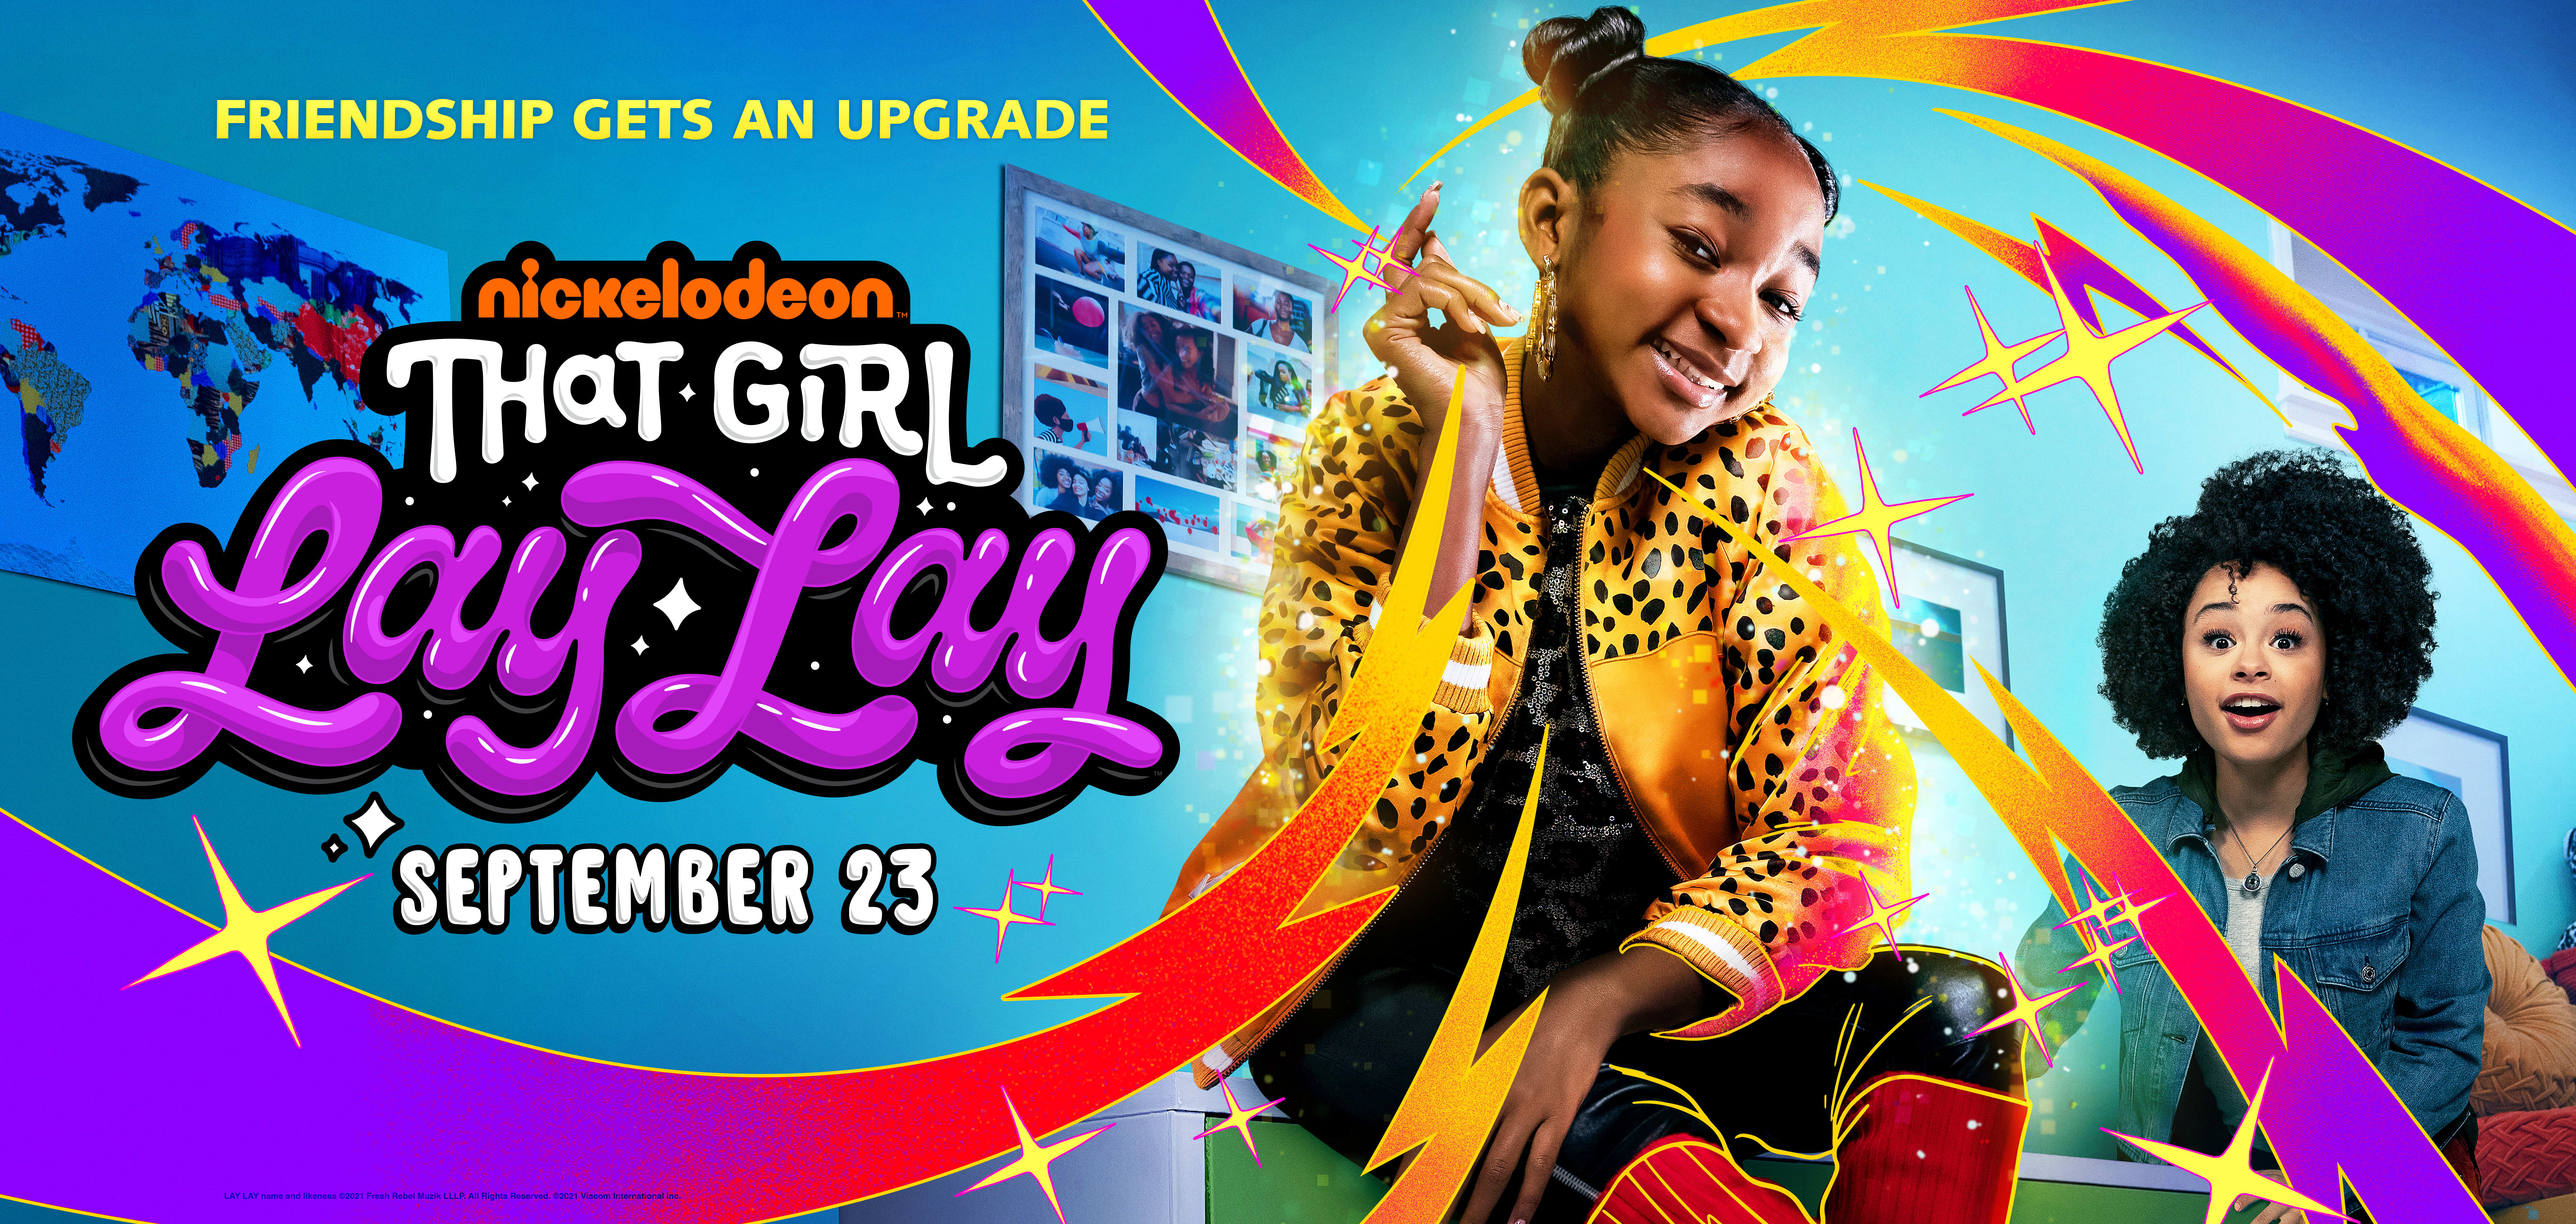 That Girl Lay Lay Interview: The Cast of the New Nickelodeon Comedy Share Their Excitement